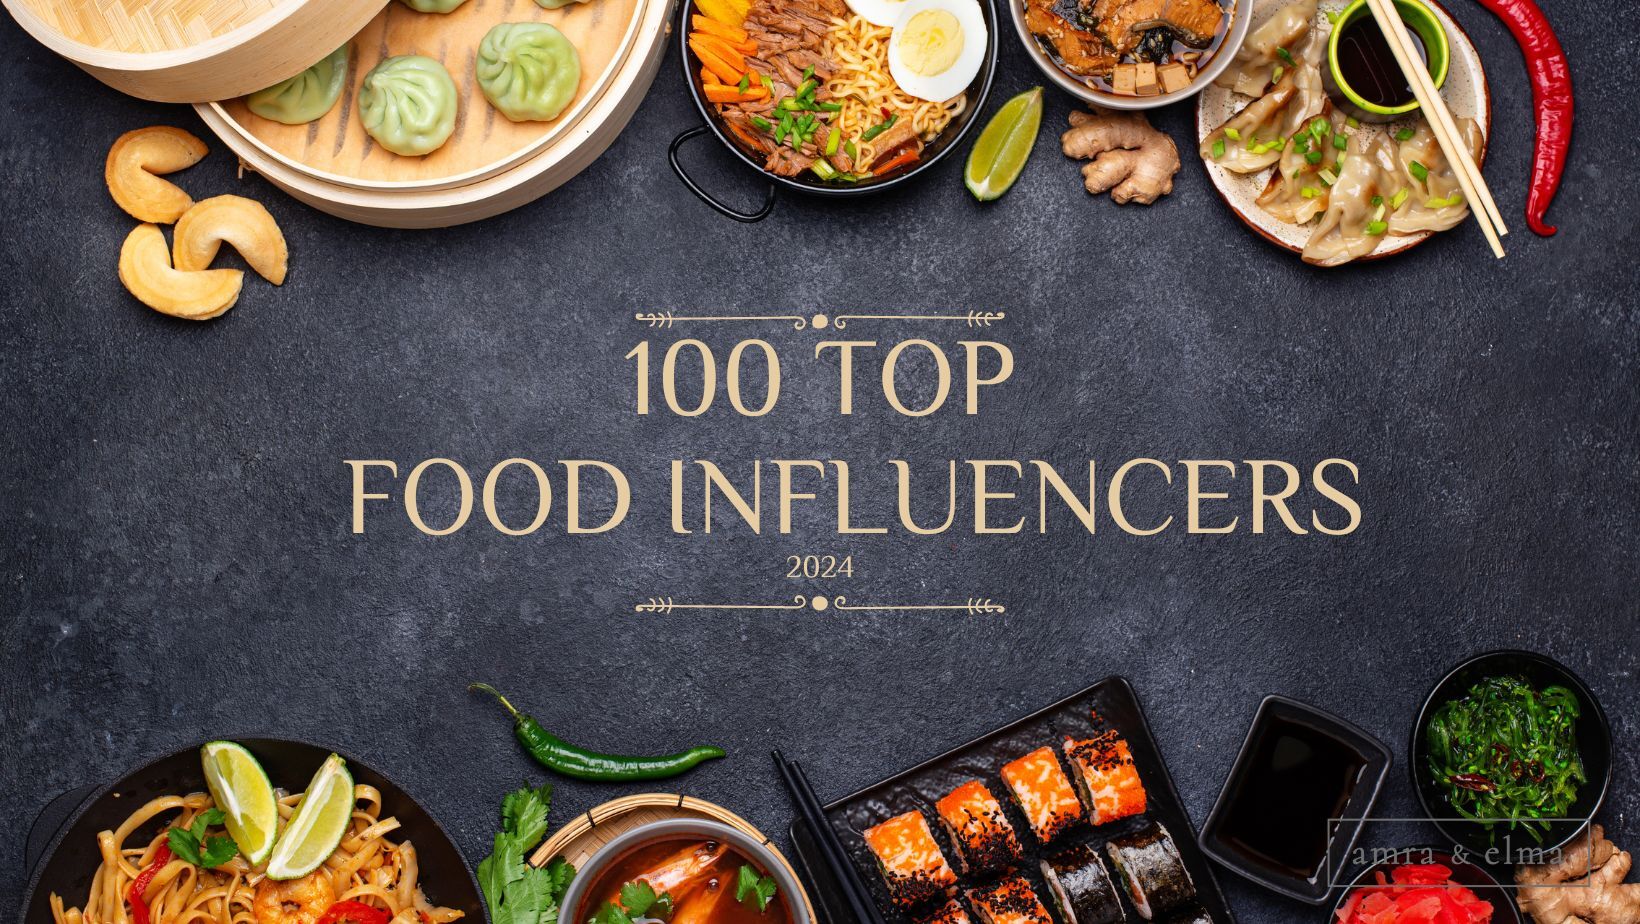 100 TOP FOOD INFLUENCERS TO FOLLOW IN 2024 (UPDATED)